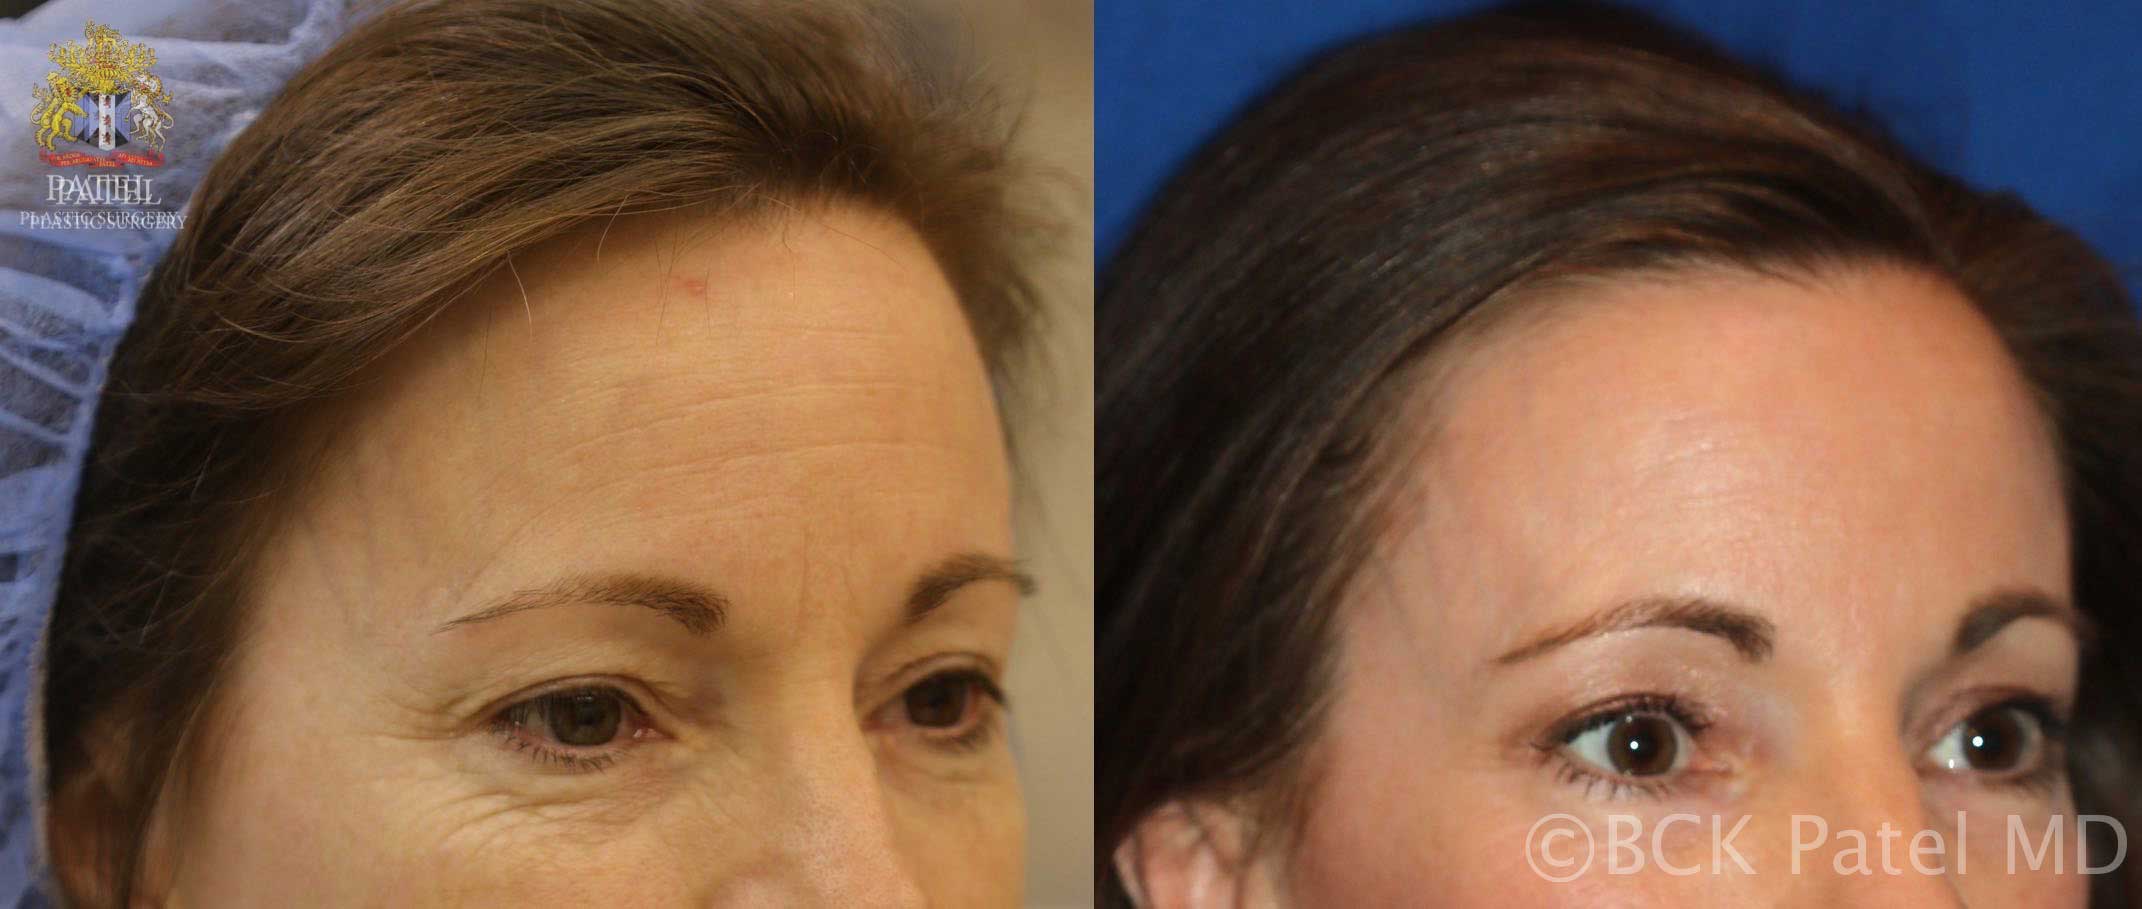 Results of using the CO2 fractionated laser (also known as Fraxel) to improve forehead lines and pigment by Dr. Bhupendra C. K. Patel MD, FRCS